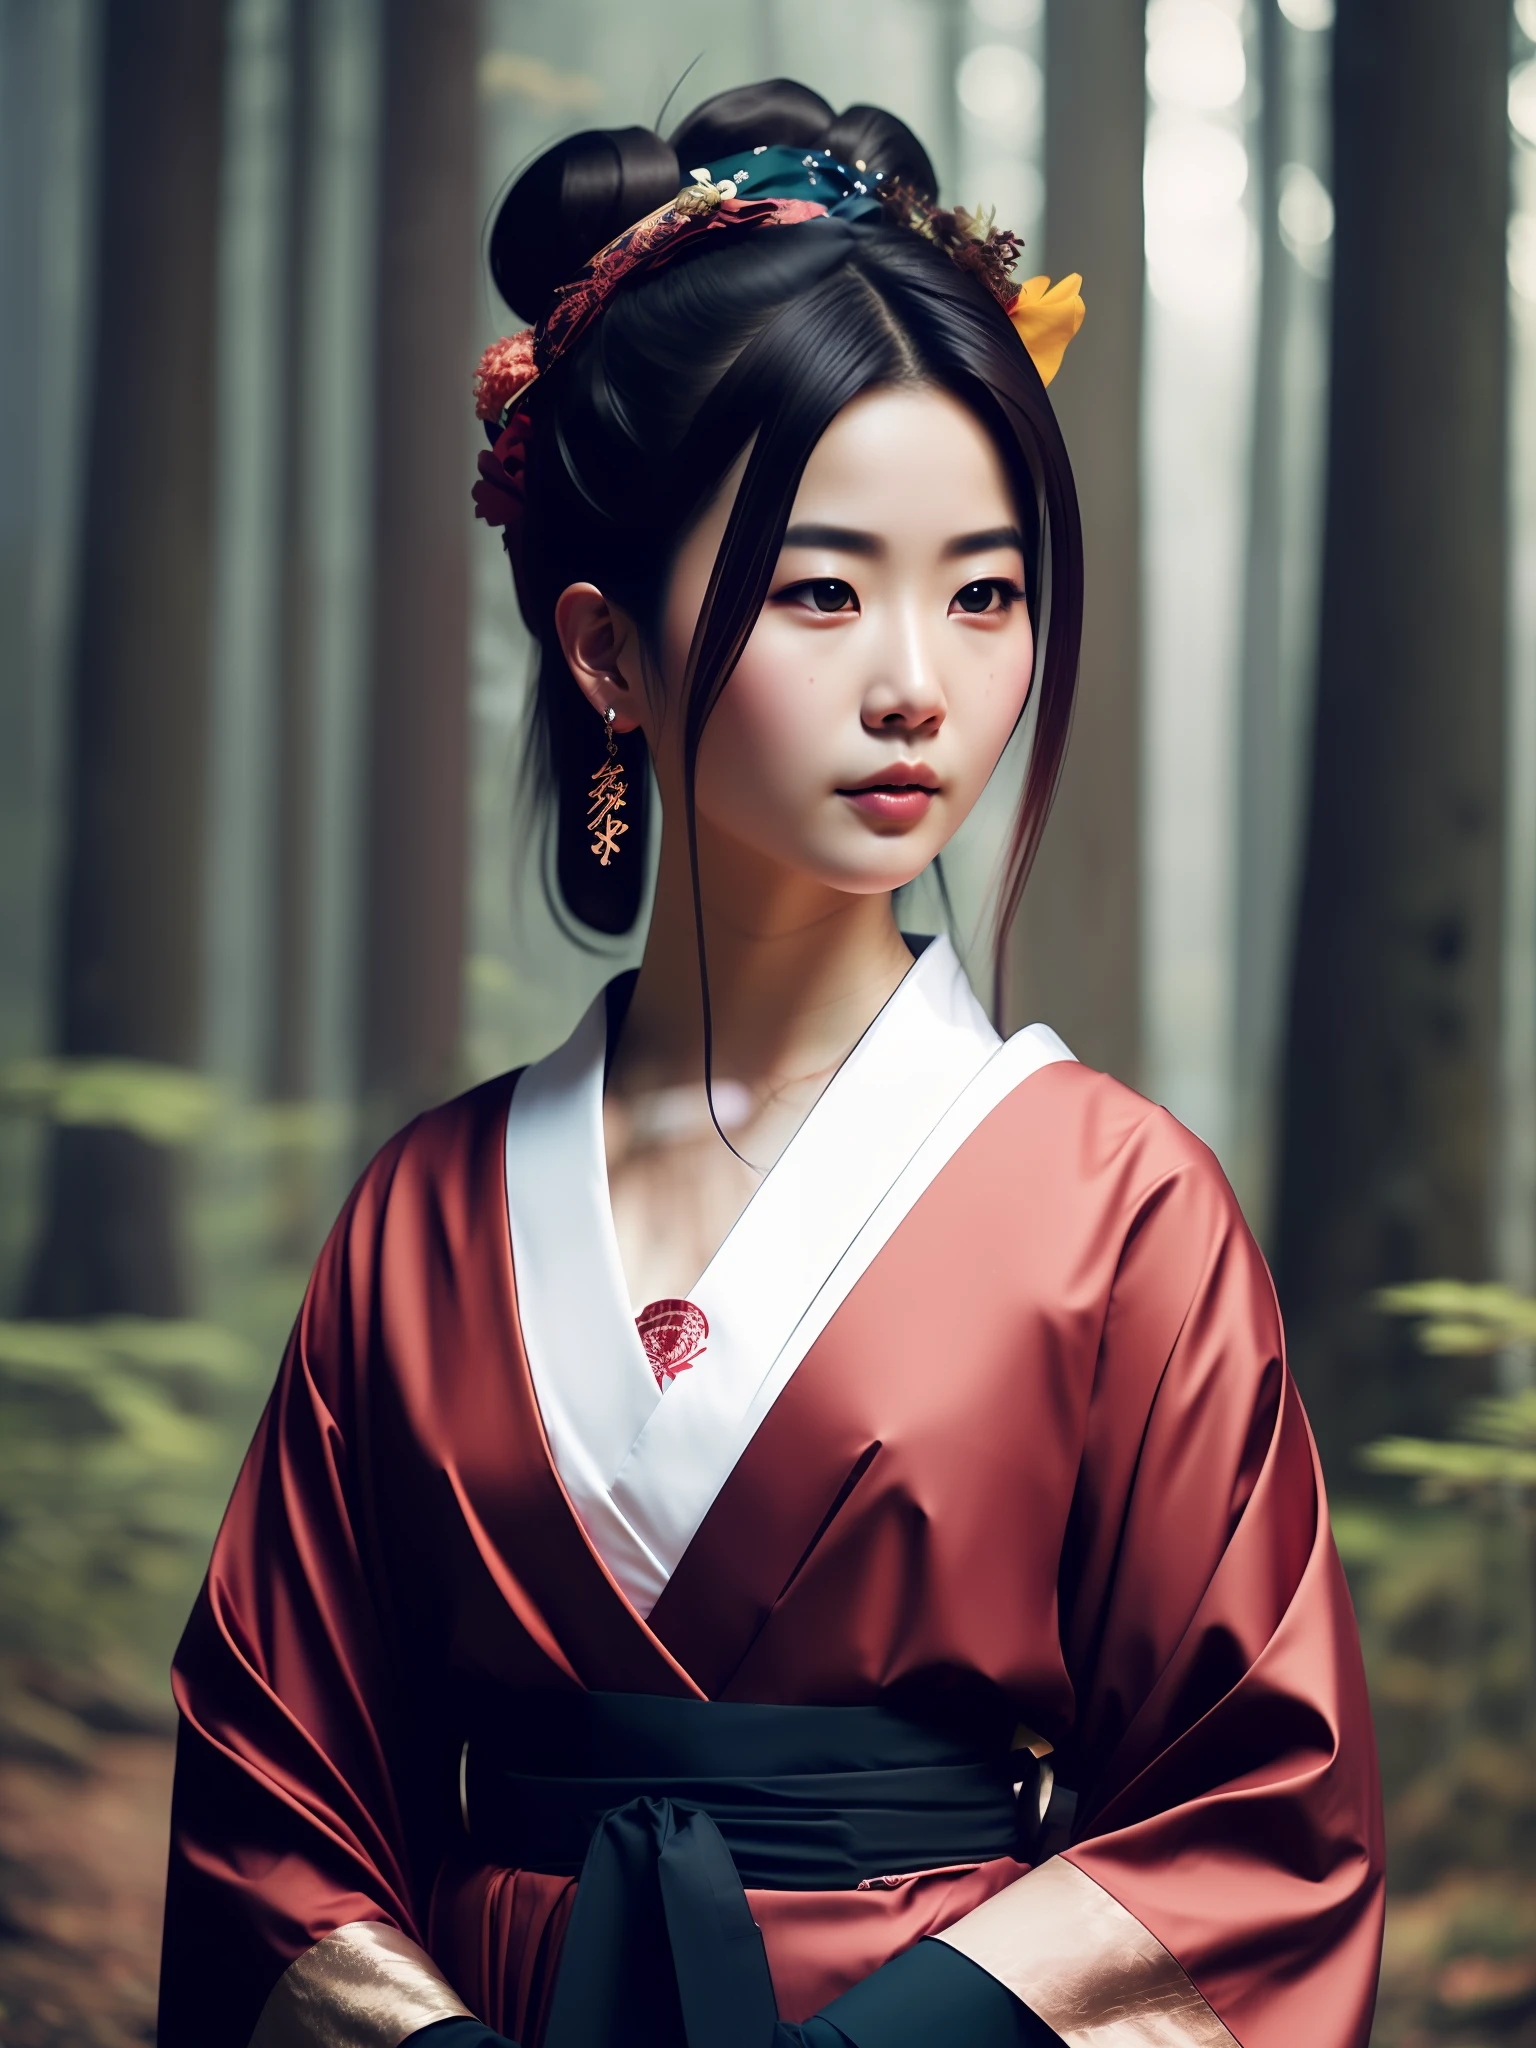 fking_scifi_v2, portrait of a young very beautiful japanese gueisha, in front of a smoky forest, rich colorful clothes and japanese umbrella, close up, mysterious pose and attitude. fking_cinema_v2